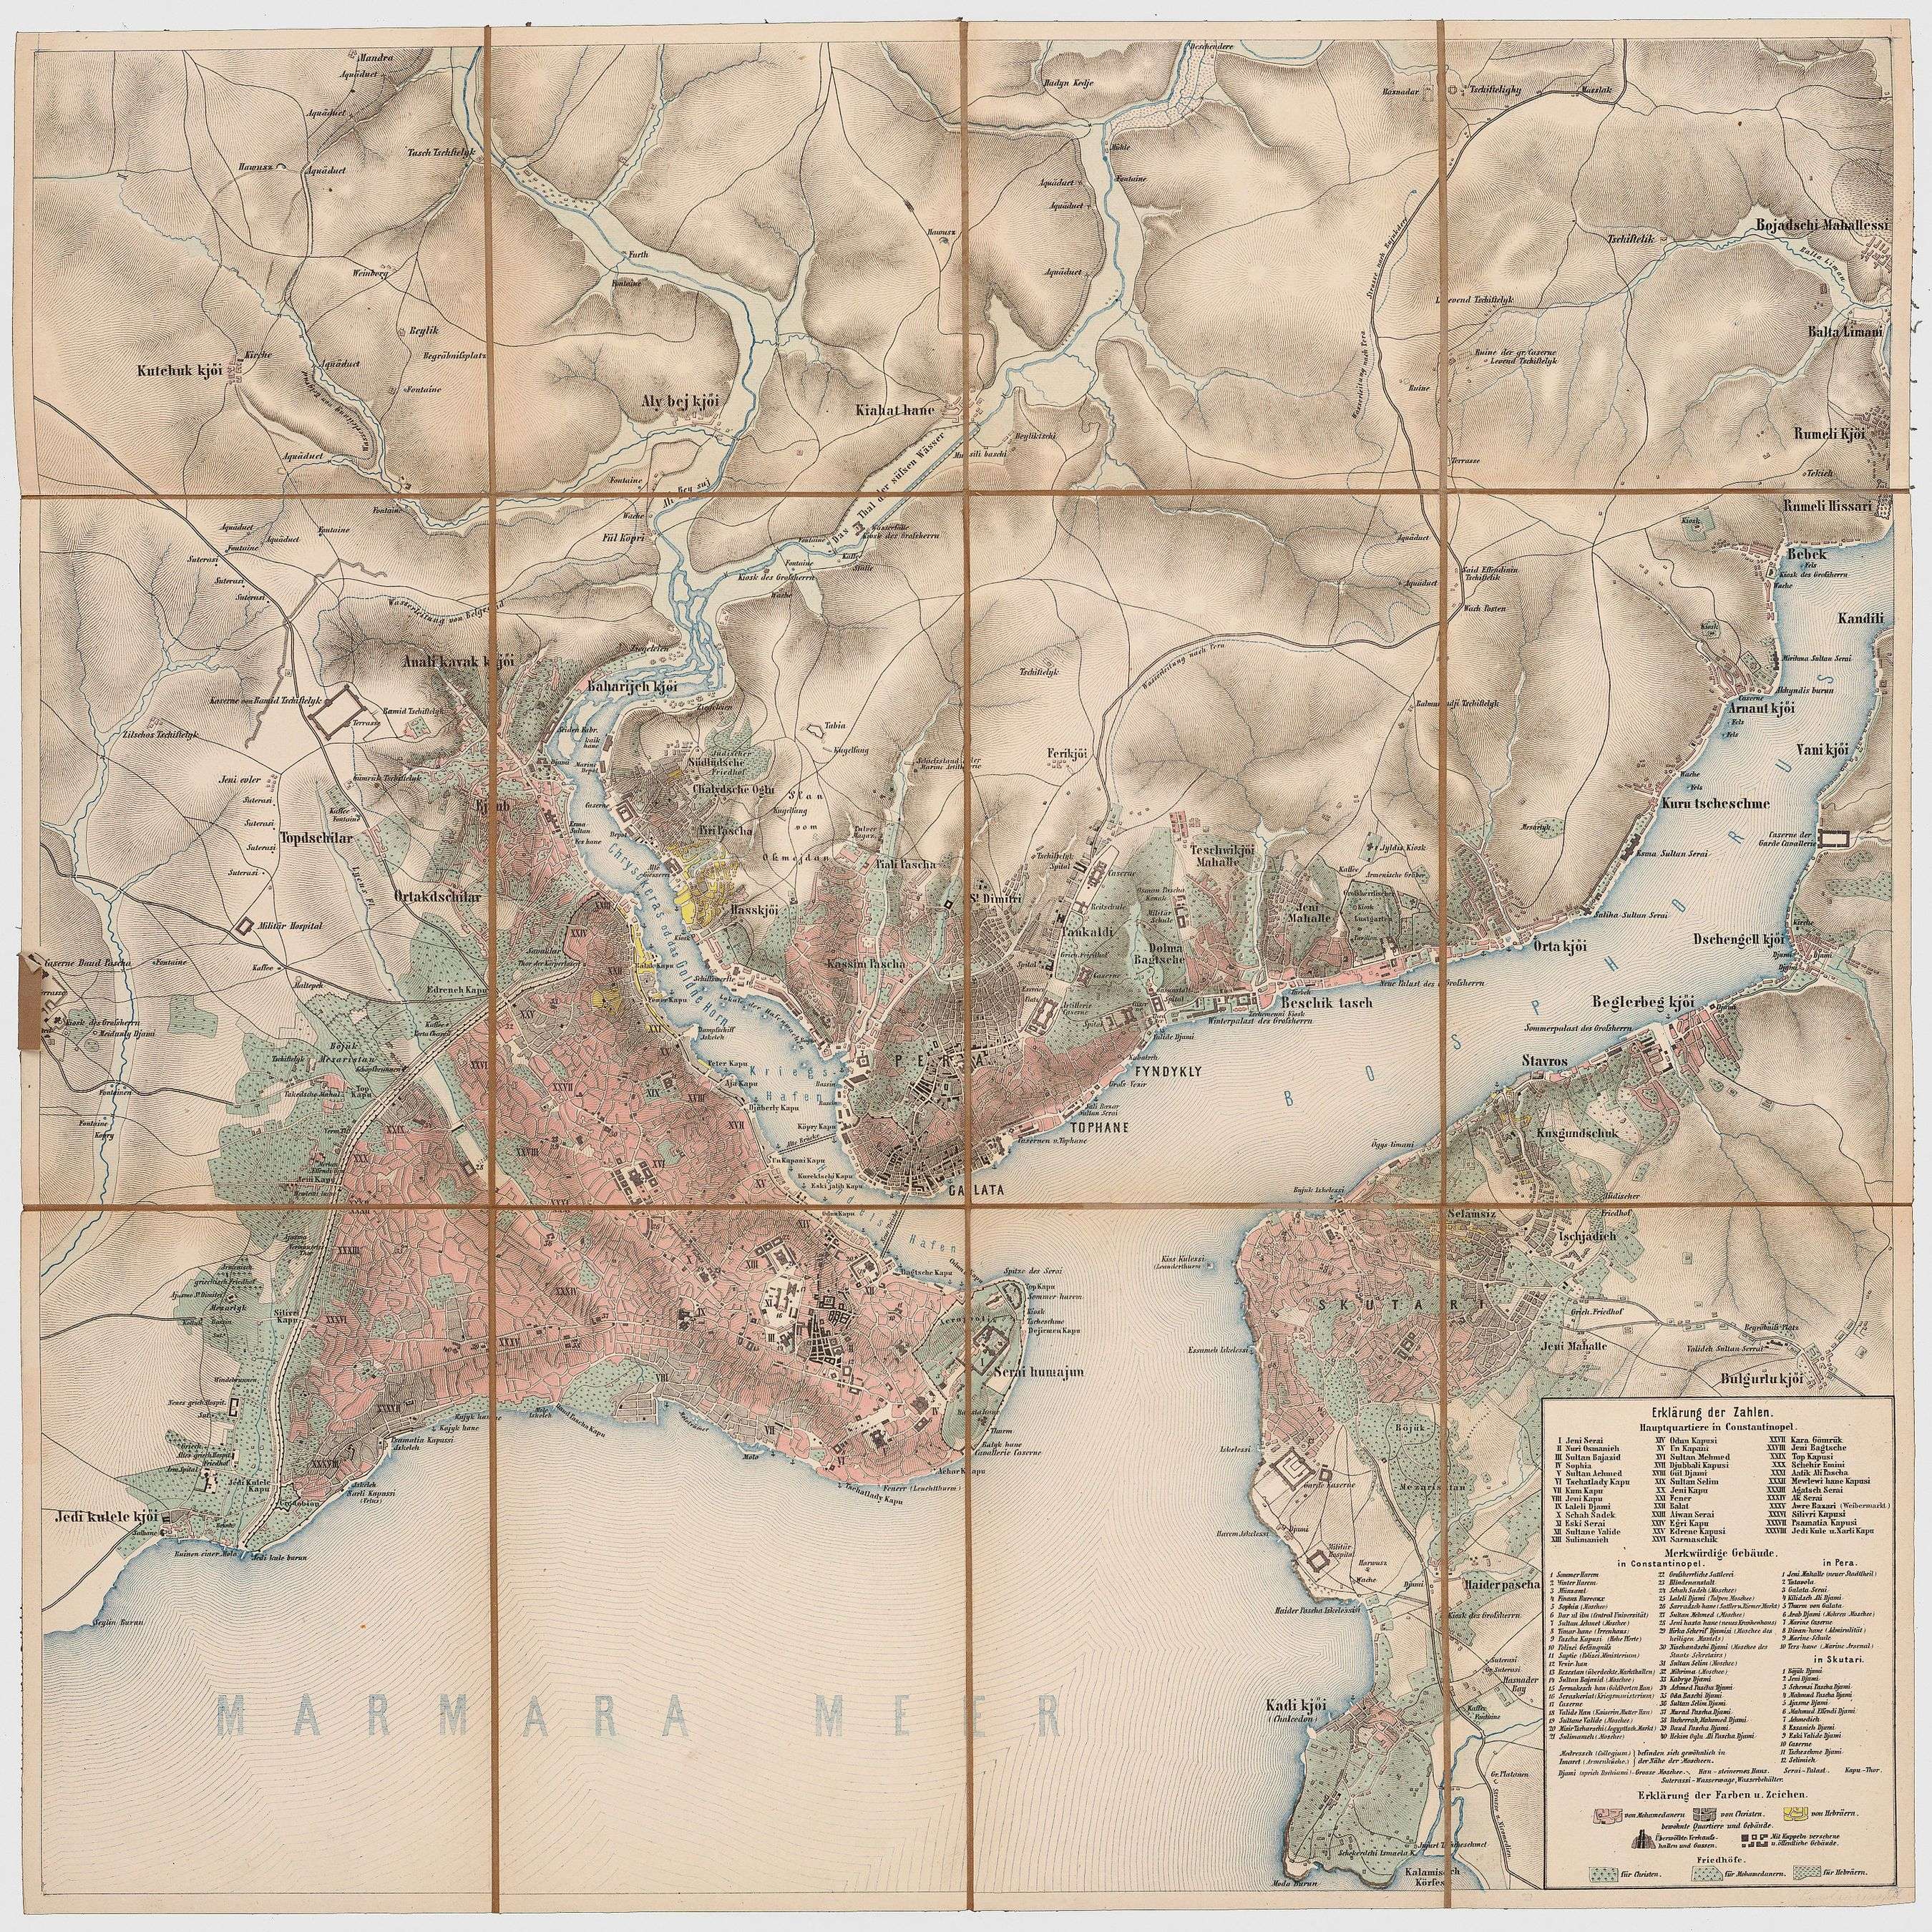 Arnavutköy shown on an 1860s German map as "Arnaut kjoi" 10 miles north of Constantinople on the Bosphorus. Owing to its location (between Arnavutköy and the Rumelihisarı, the Bebek Seminary provided outreach to the local Greek and Armenian population through skilled trades and manufacturing. (map produced by Joseph von Scheda between 1860-70)